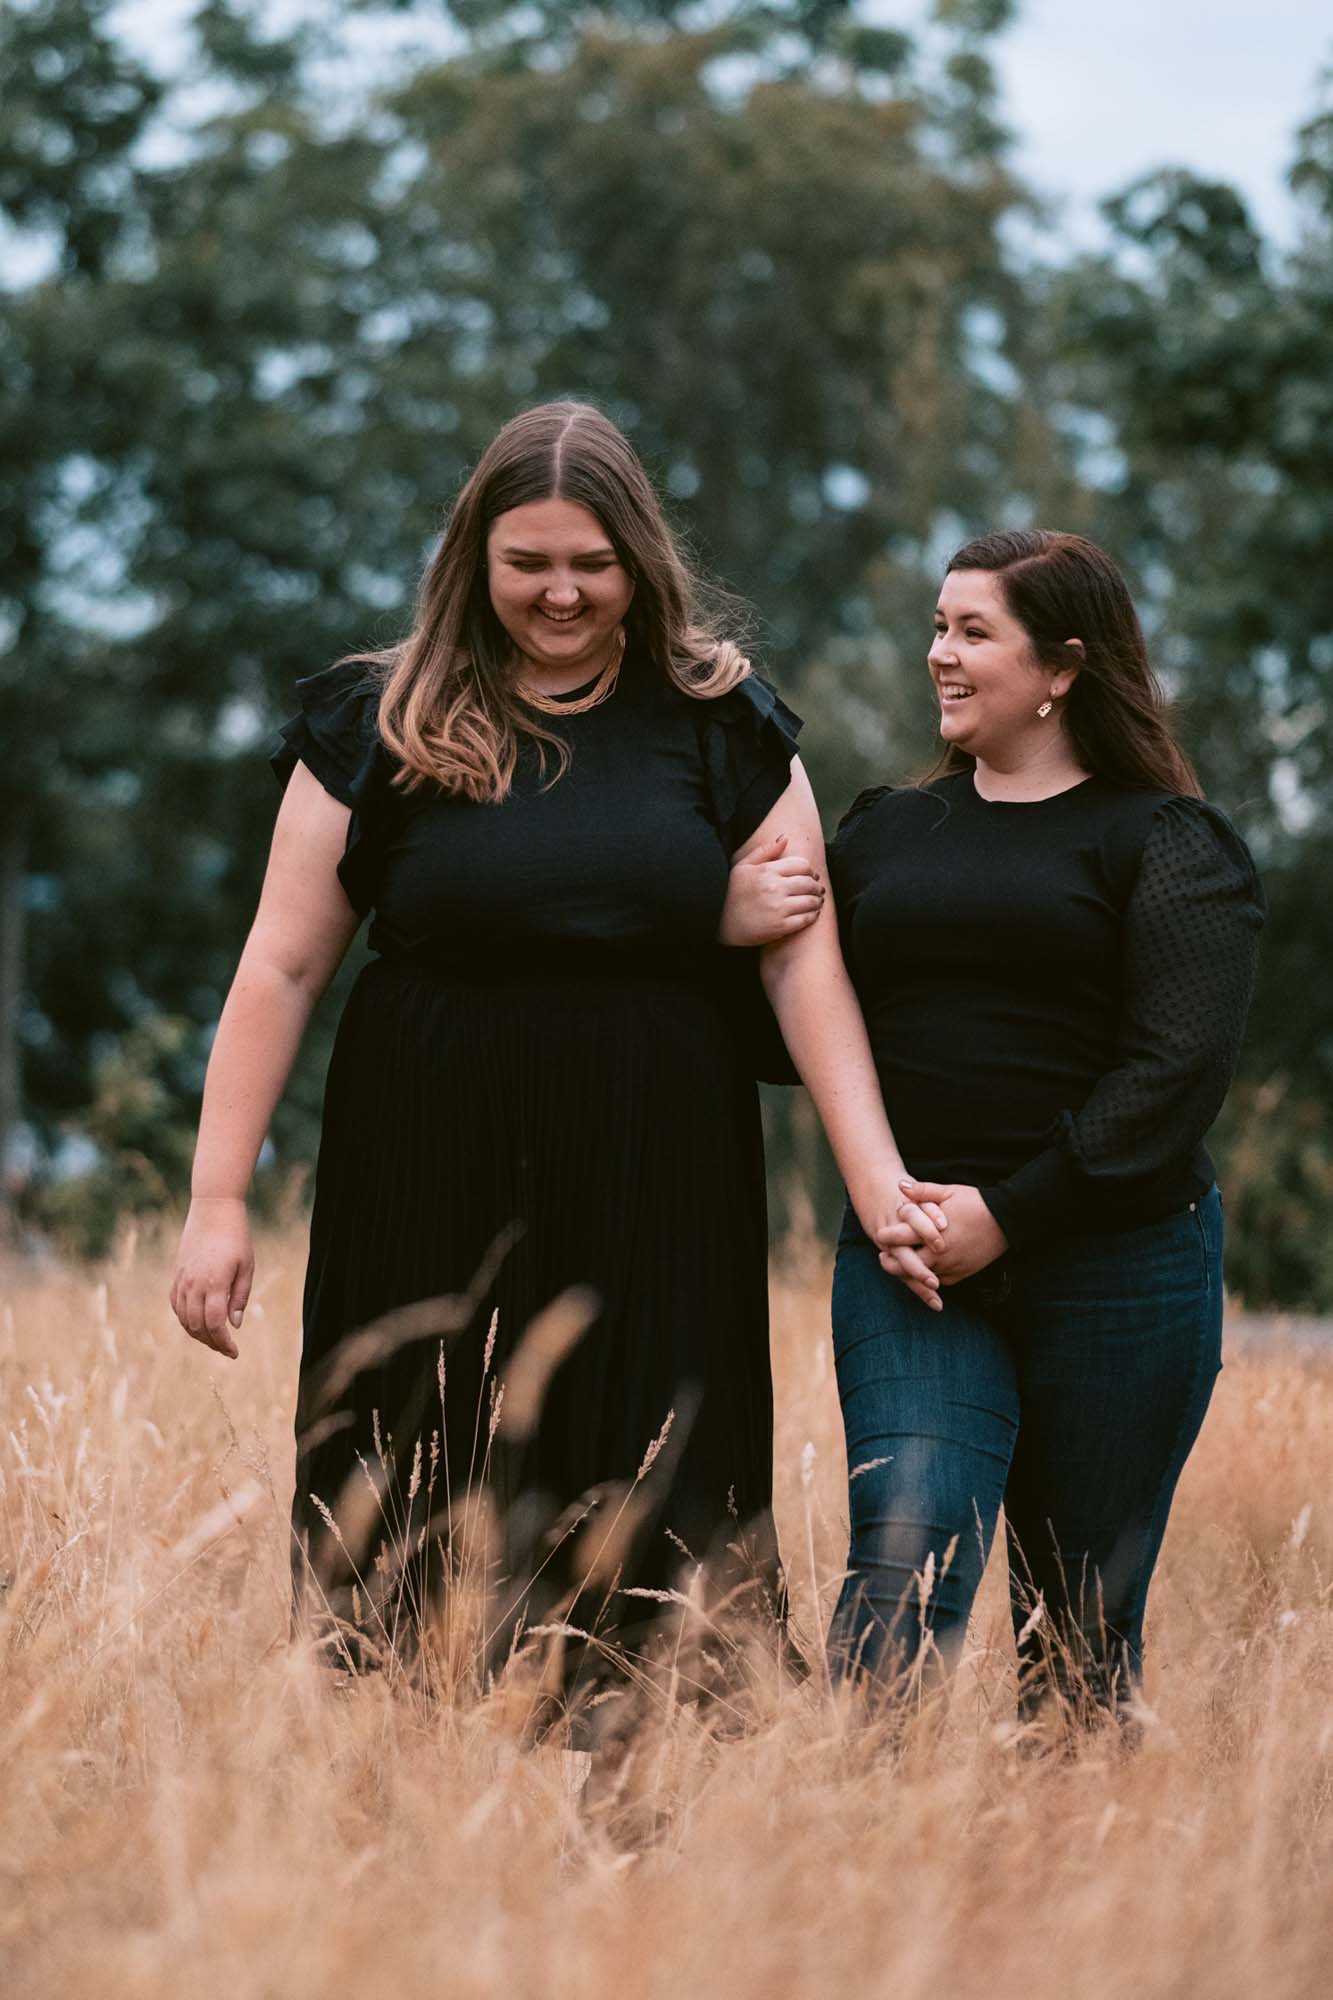 Romantic proposal with wine and nature at Seattle's Discovery Park | Rove Coast Photography | Featured on Equally Wed, the leading LGBTQ+ wedding magazine